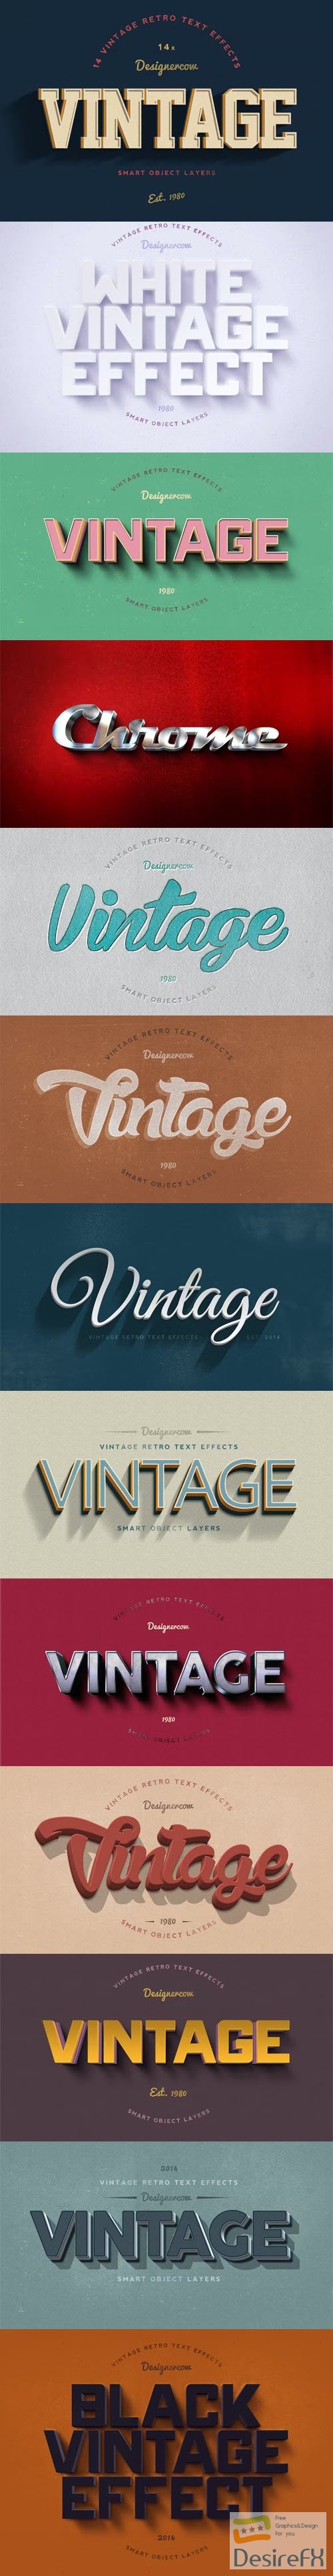 14 Vintage Retro Text Effects